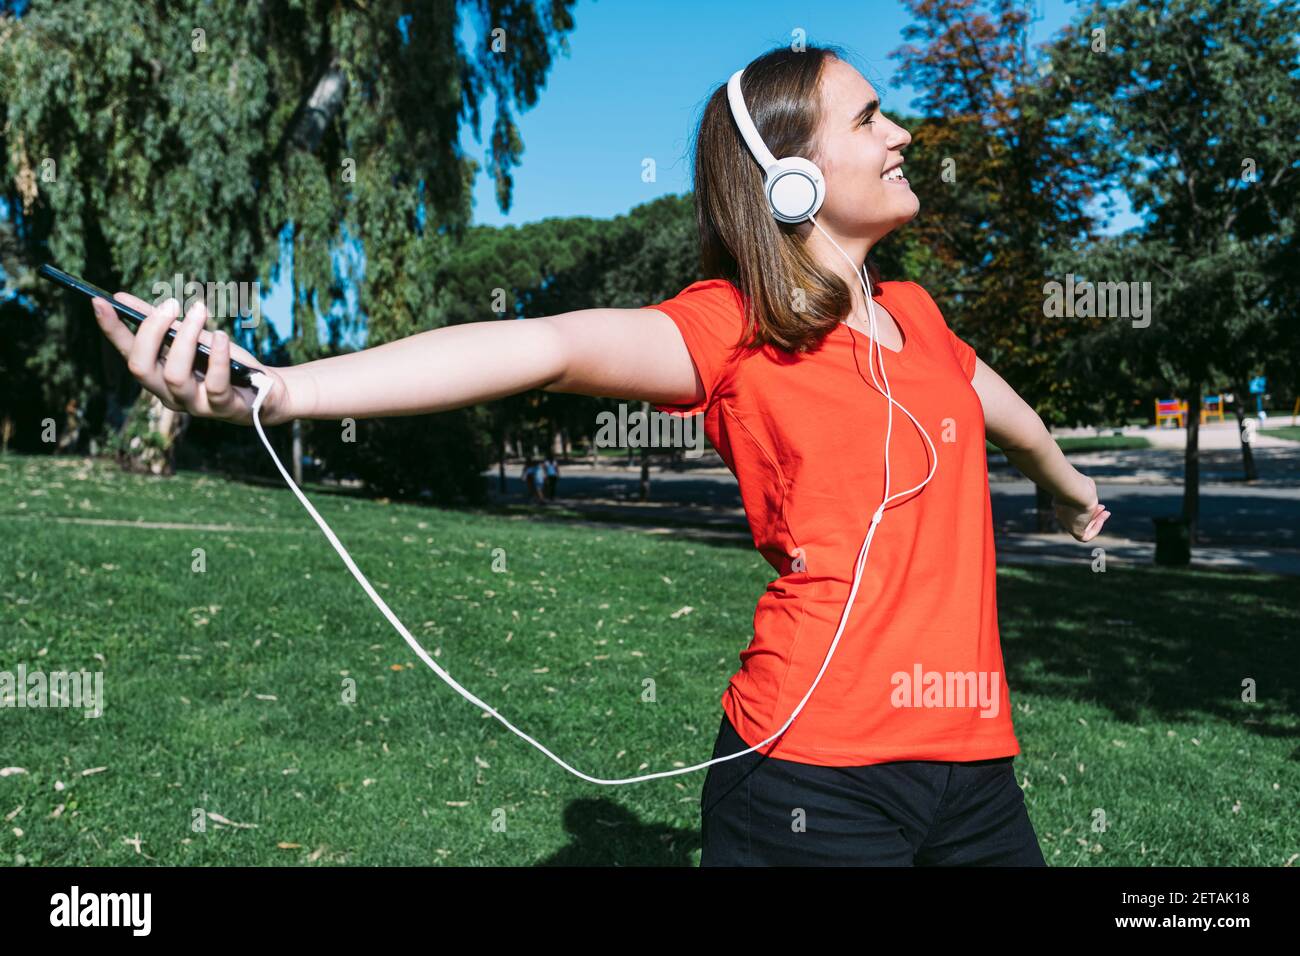 Young blonde wearing a red shirt feels free listening to music with headphones on in a park Stock Photo